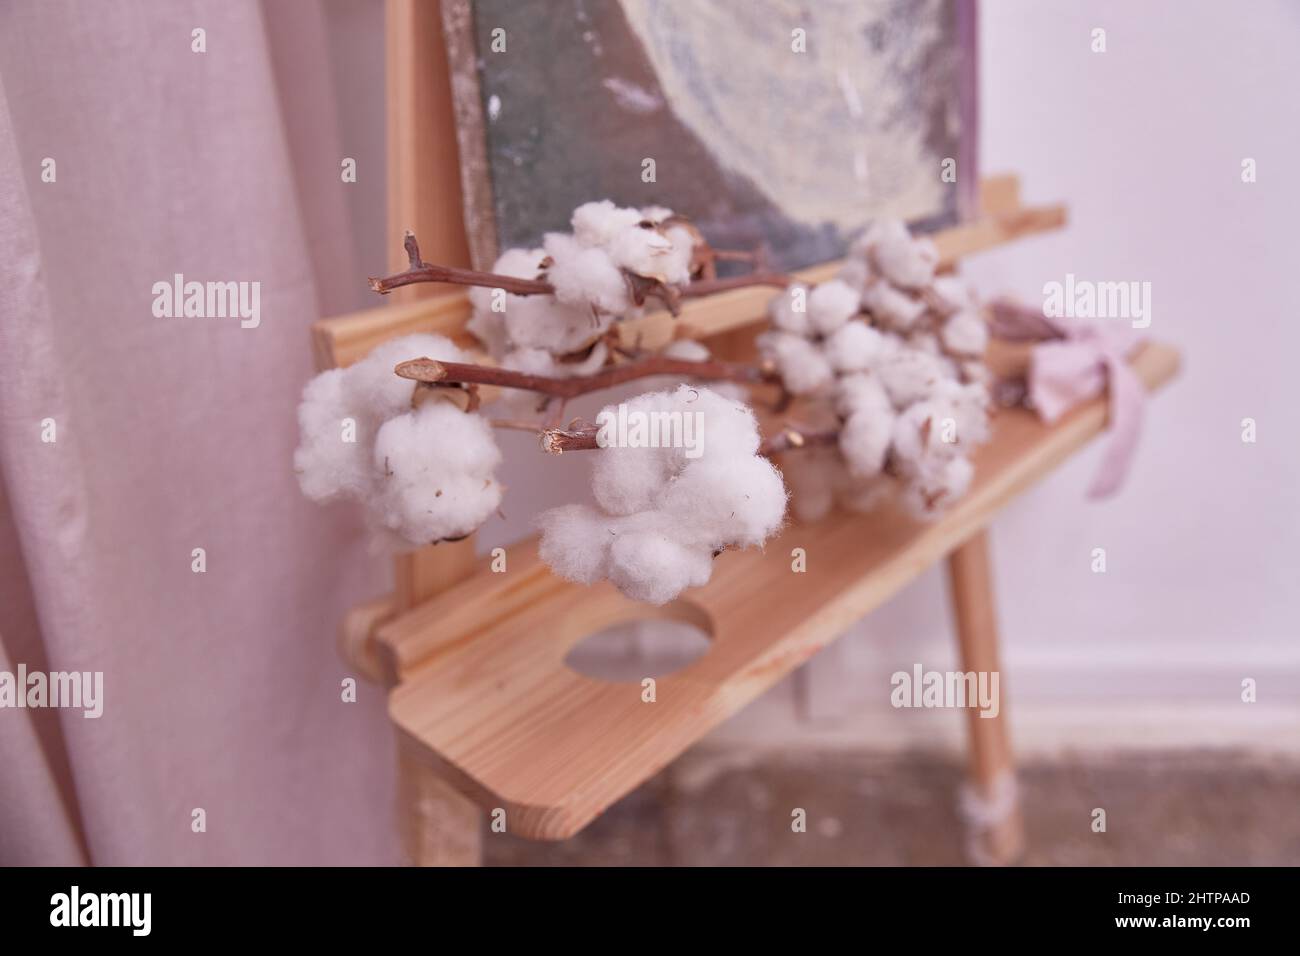 branch of a cotton plant lies on a wooden easel. Interior design of the creative artist's home space. Stock Photo